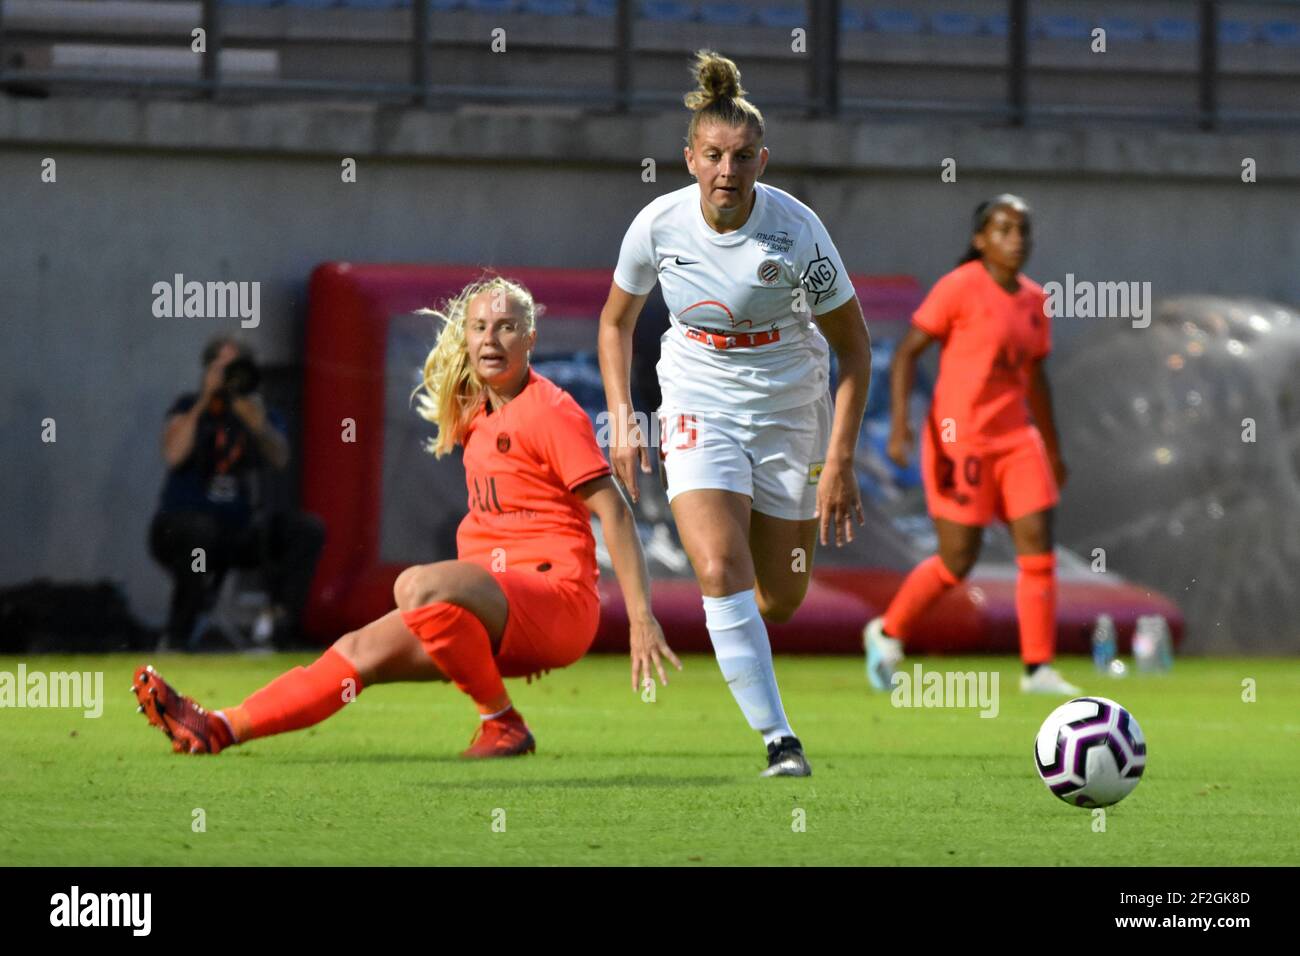 Paulina Dudek of Paris Saint Germain and Marie Charlotte Leger of  Montpellier Herault Sport Club fight for the ball during the finale of the  Women's French Cup 2019 football match between Montpellier